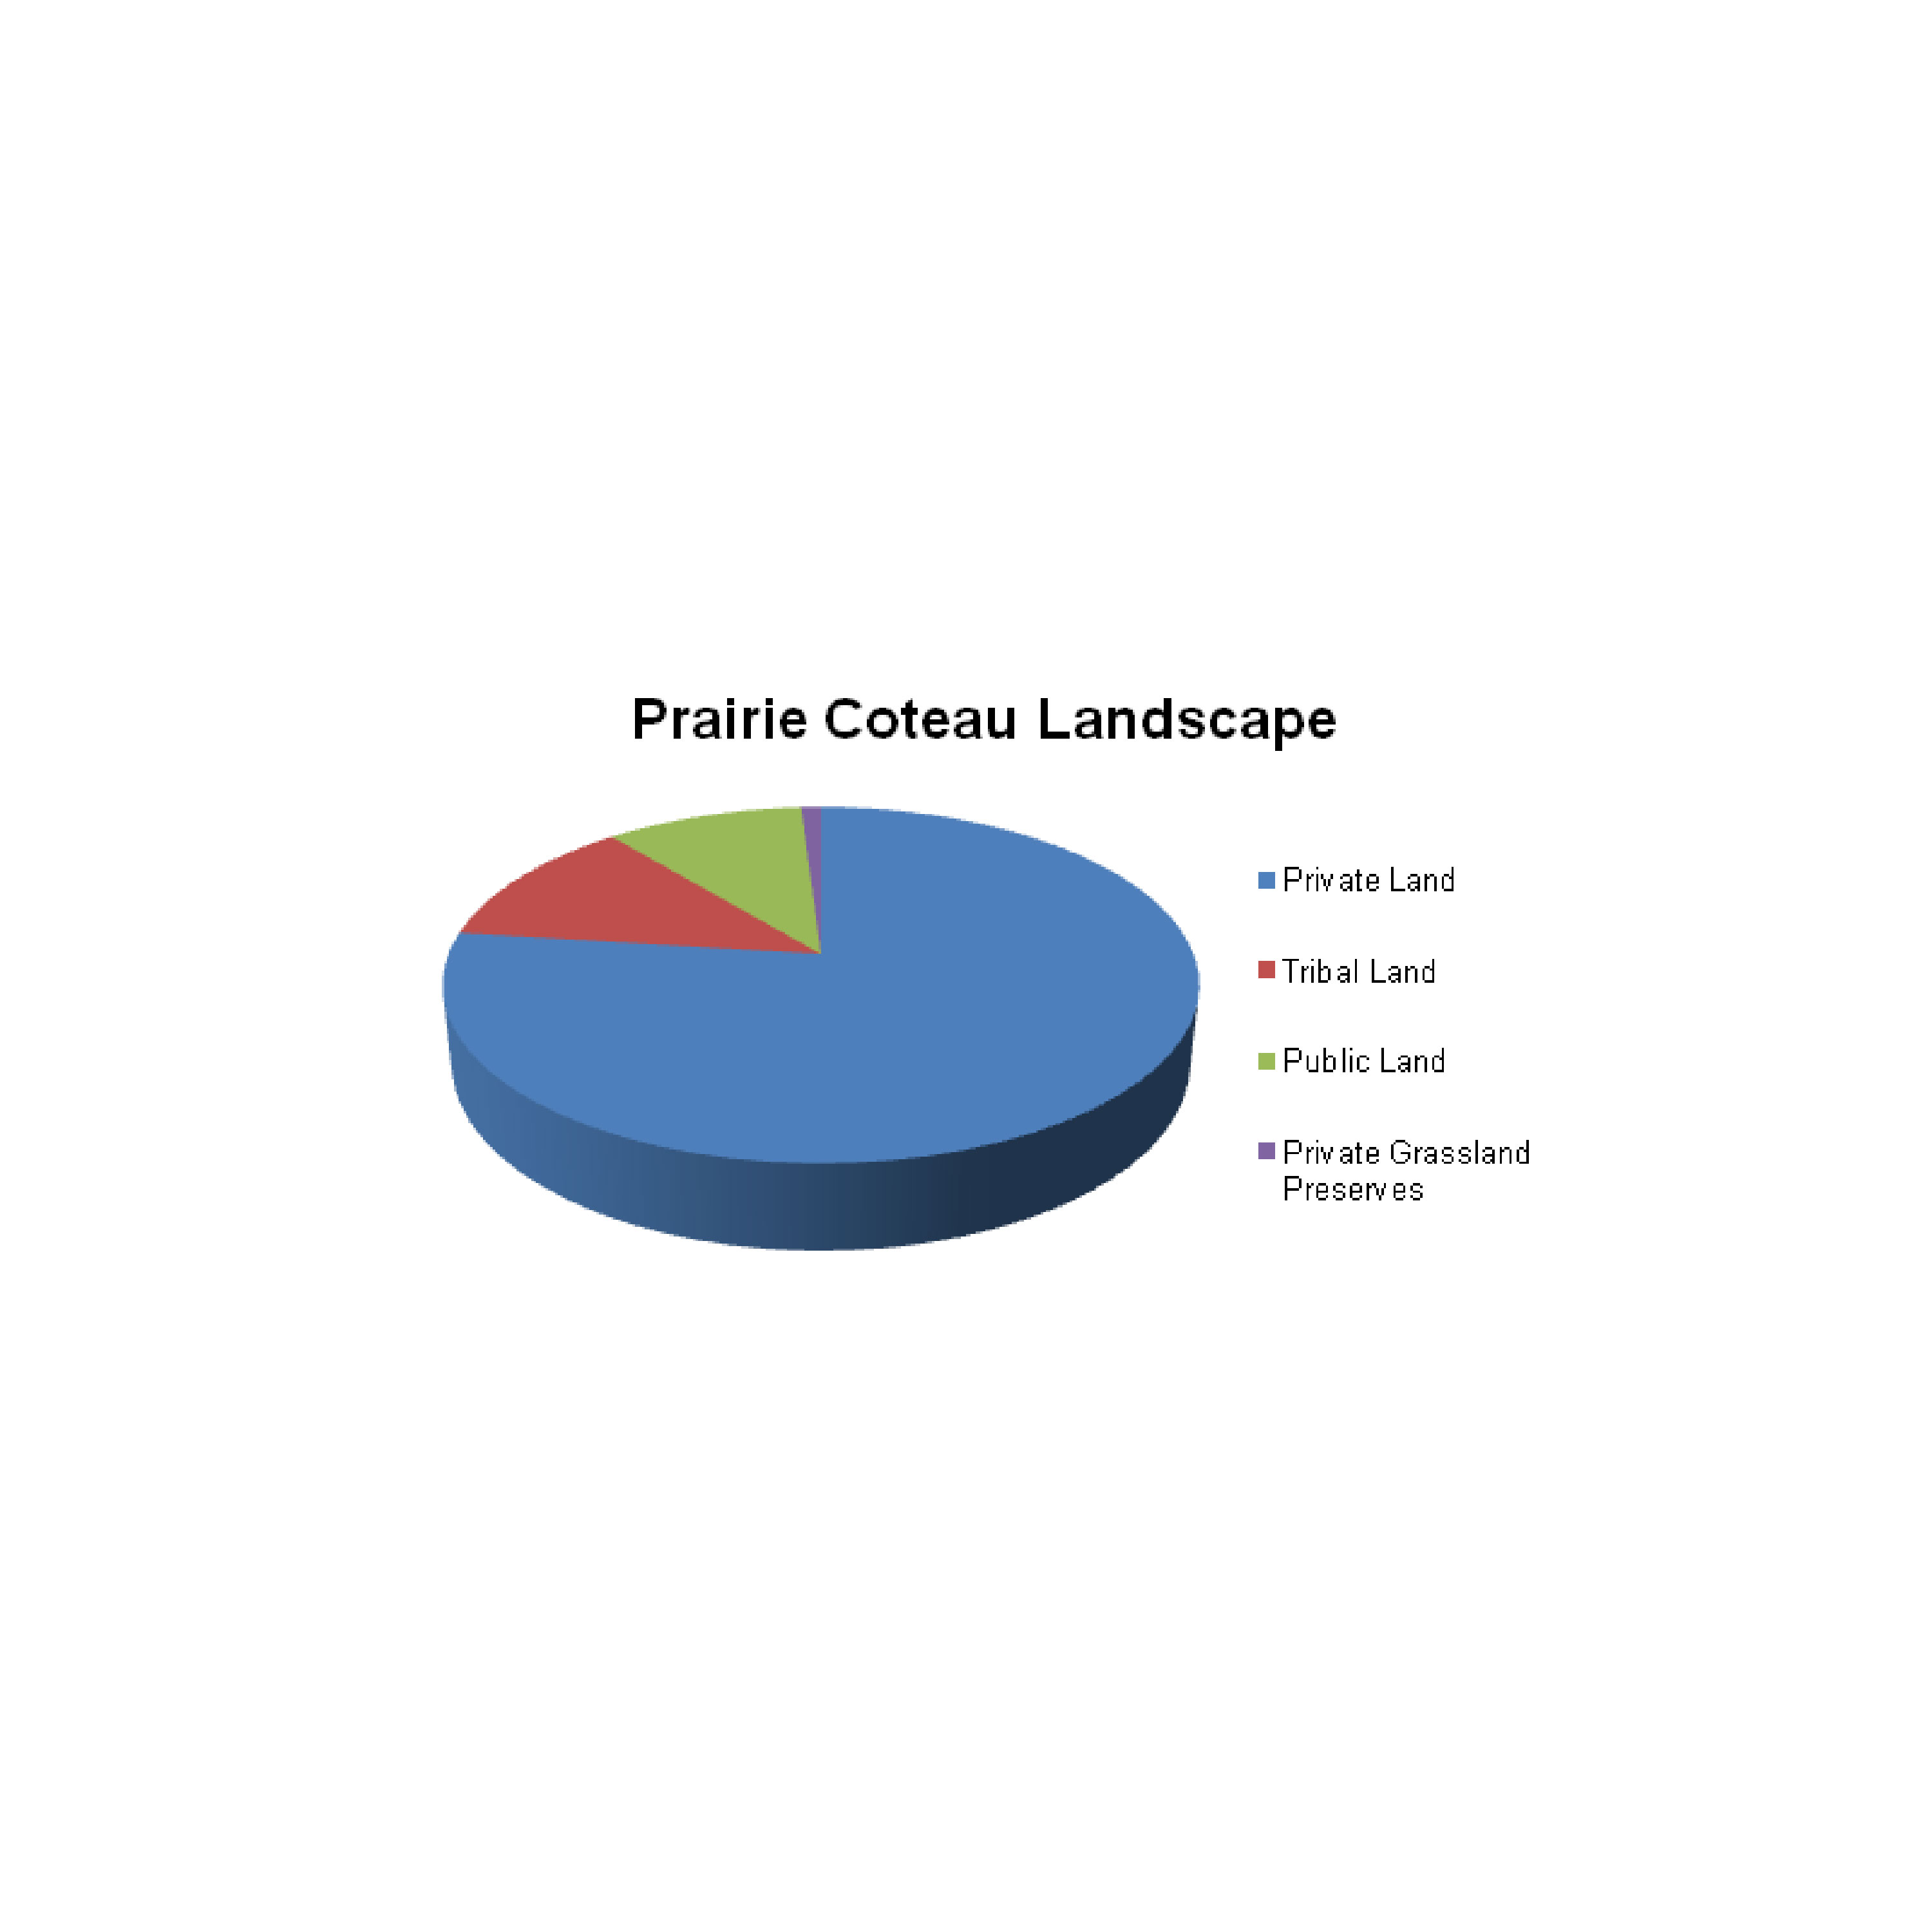 Pie chart showing the distribution of land ownership in the Prairie Coteau Landscape.